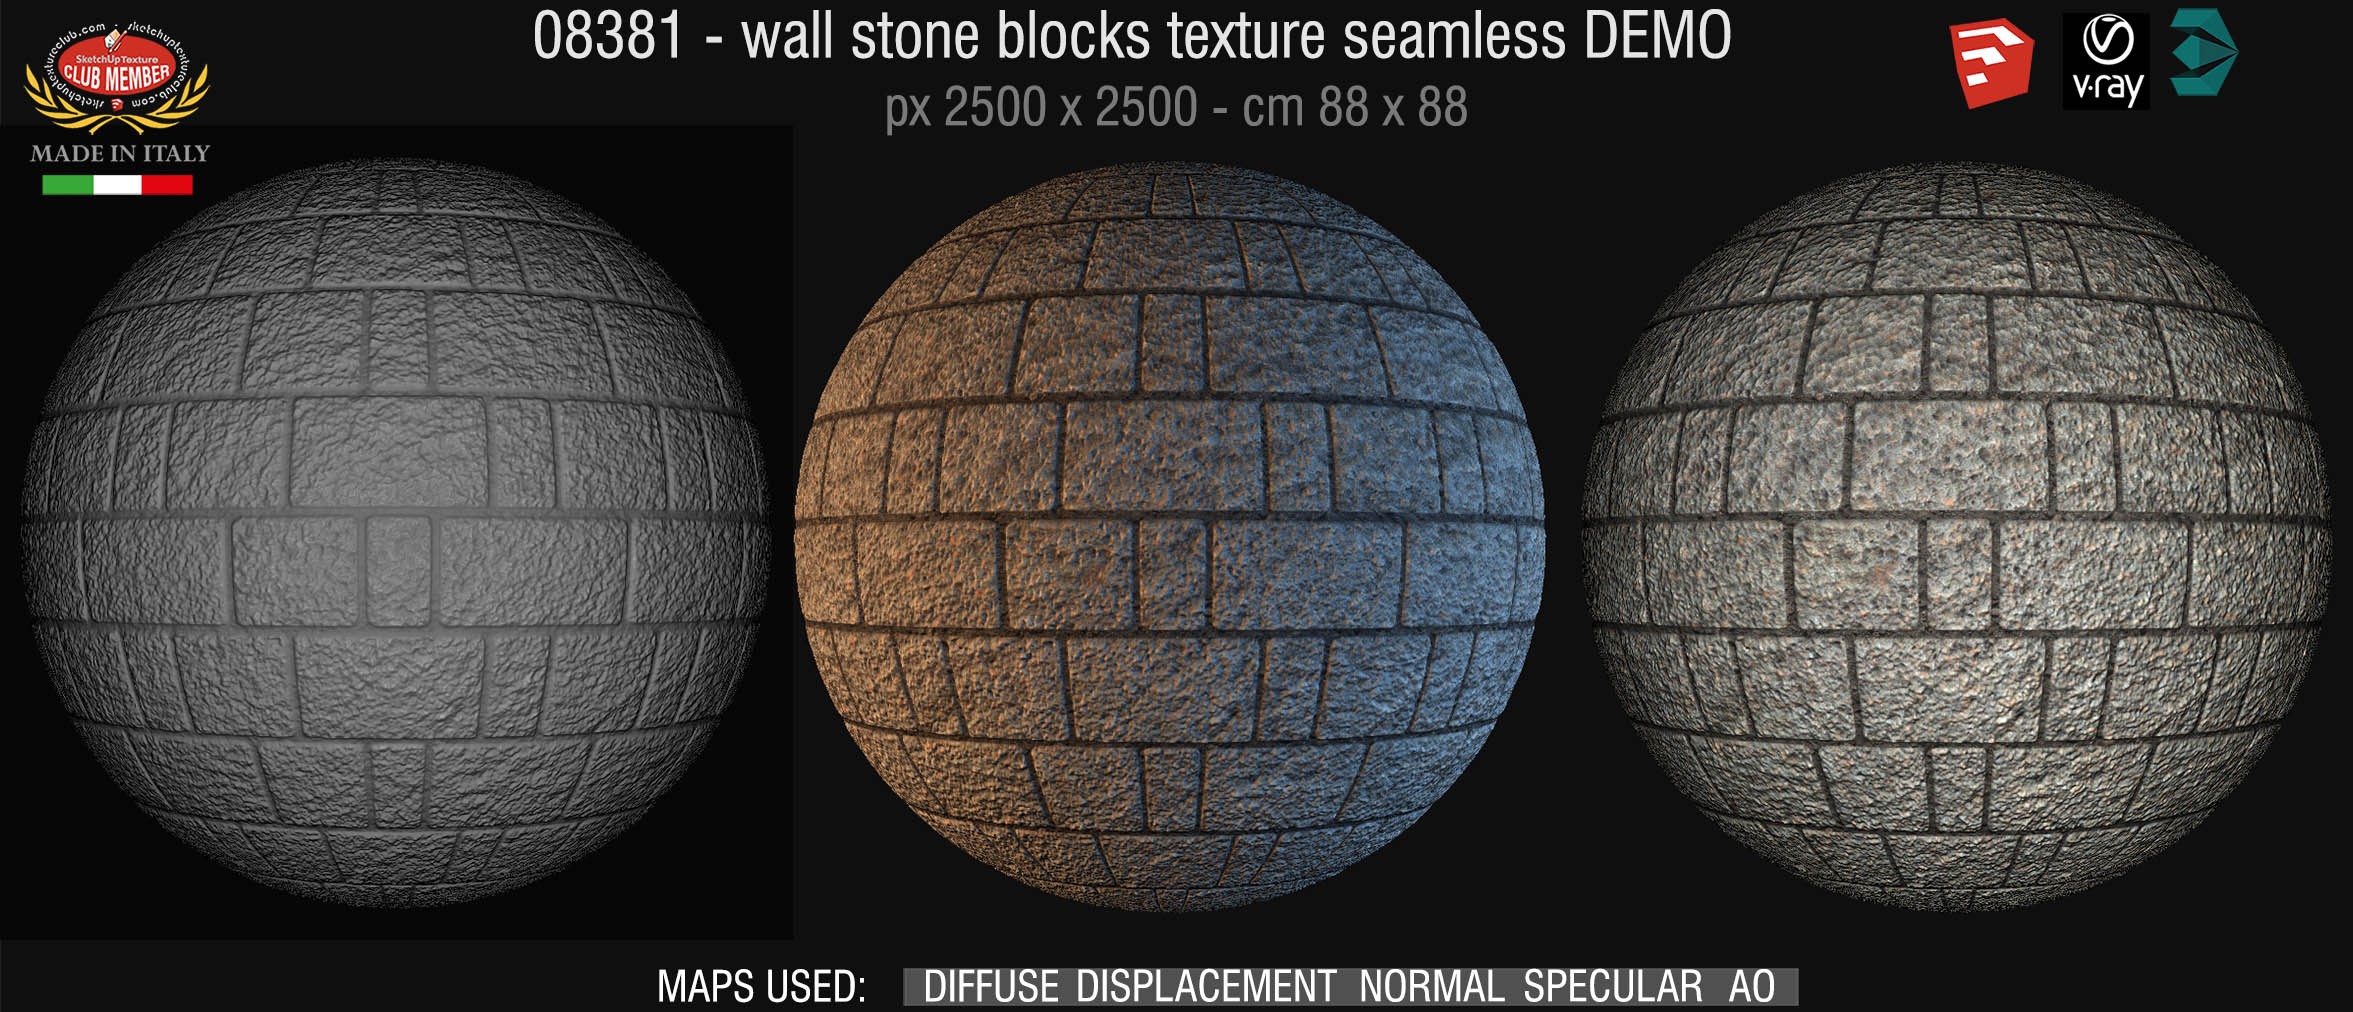 08381 HR Wall stone with regular blocks texture + maps DEMO